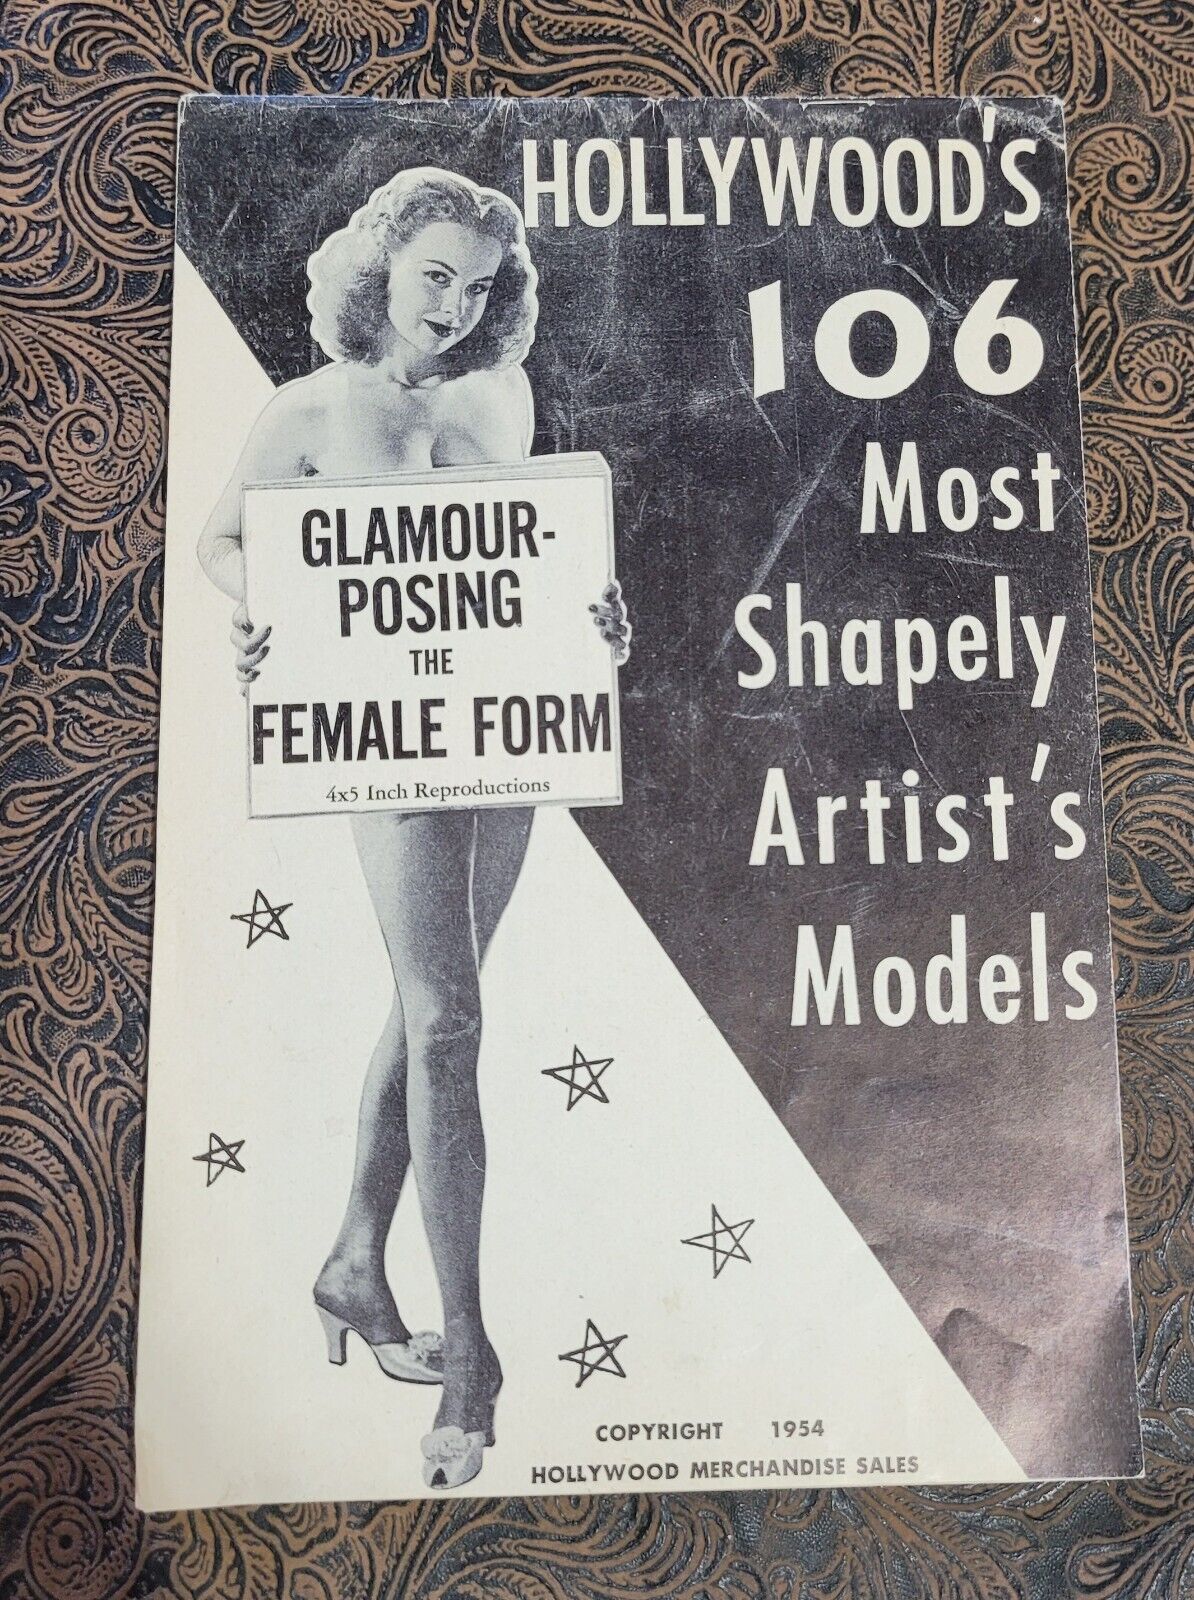 Hollywood's Most Shapely Artists Models, B&W BOOK, 53 Pg 1954, Great Condition